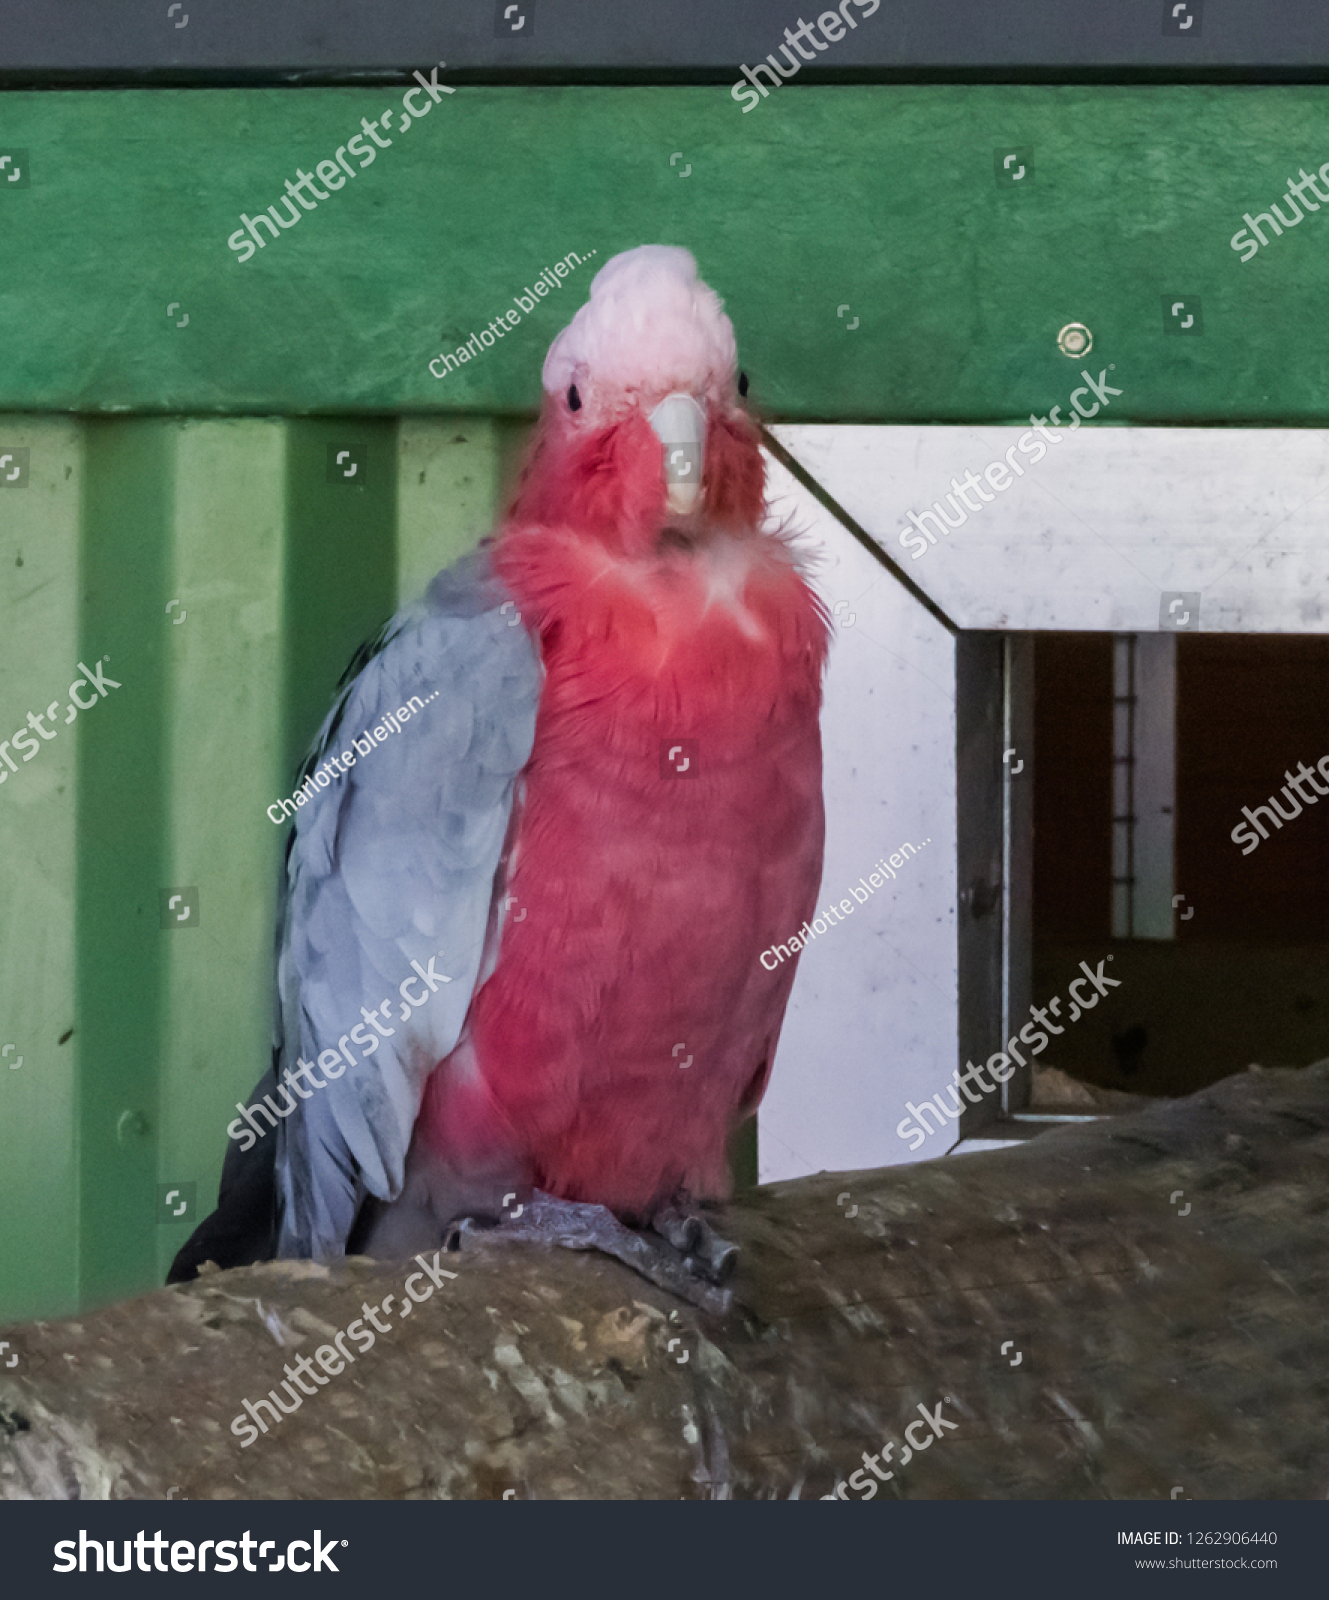 Galah Rose Breasted Cockatoo That Well Stock Photo Edit Now 1262906440,Barbacoa Meat